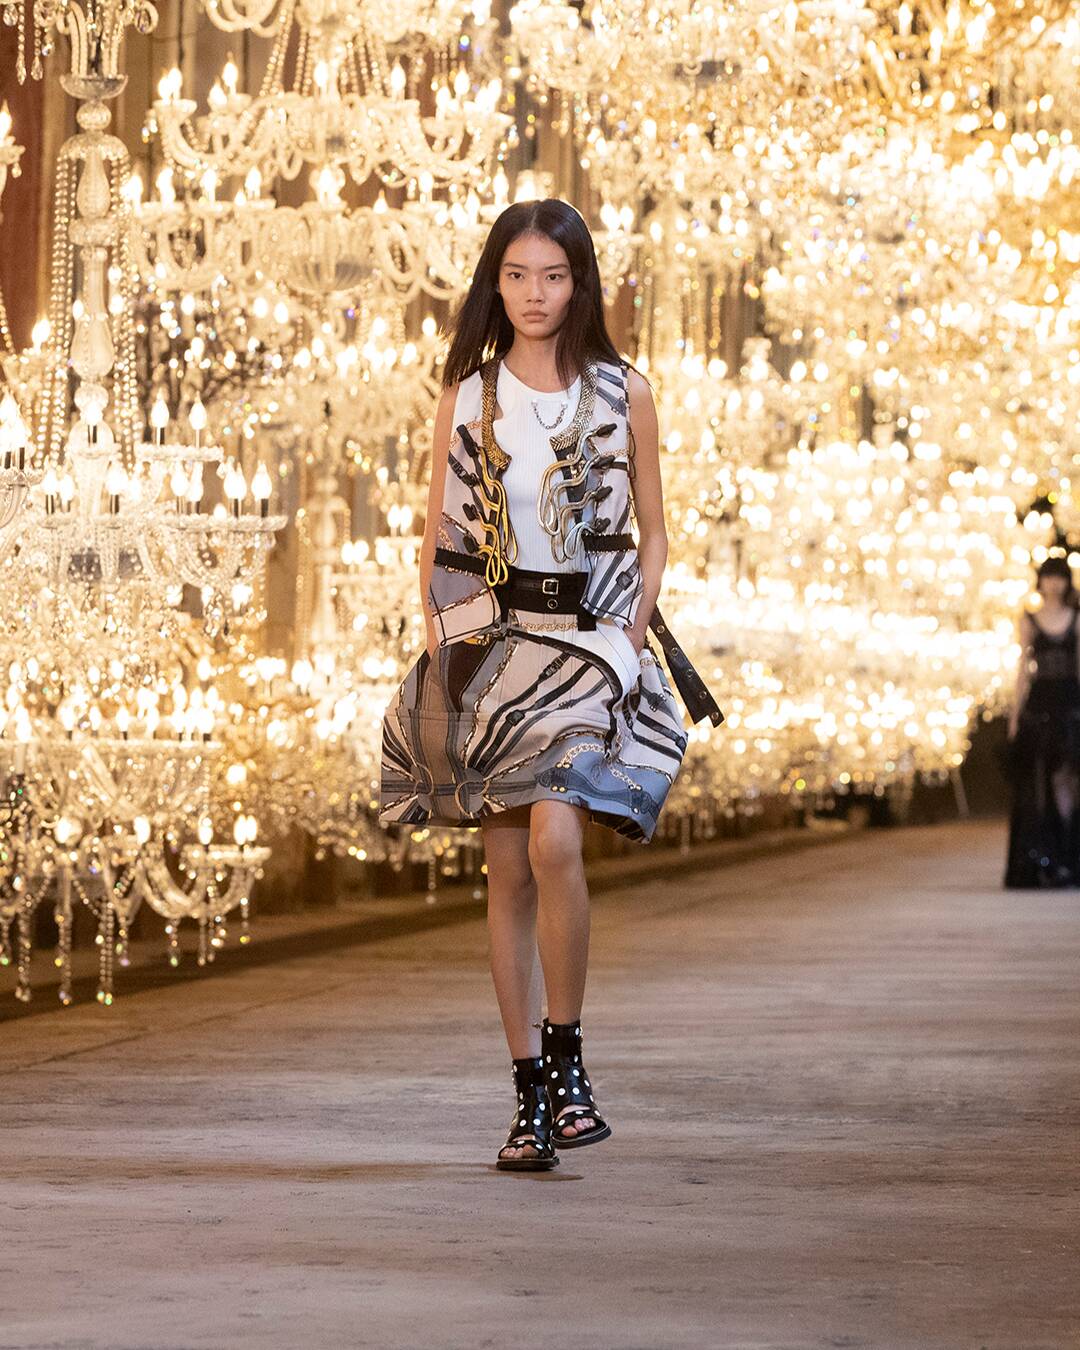 Louis Vuitton continues Paris runway experience with Act 2 in